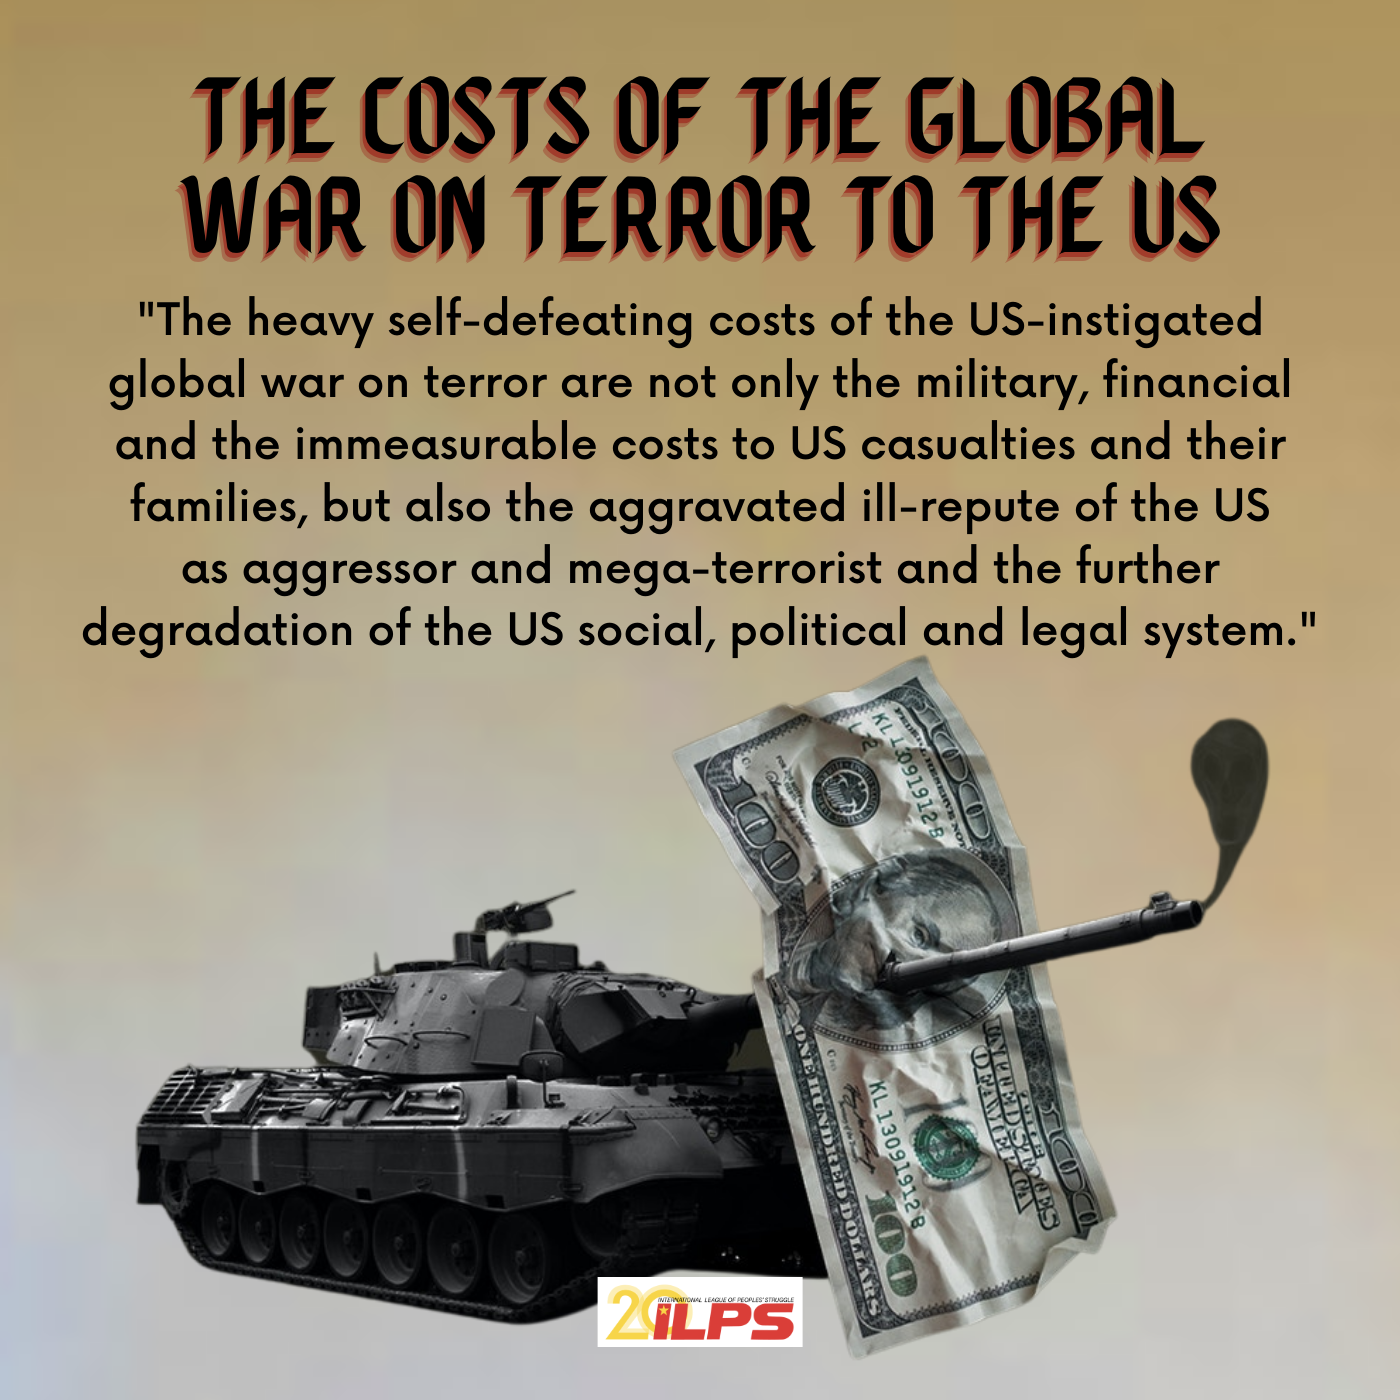 THE COSTS OF THE GLOBAL WAR ON TERROR TO THE US